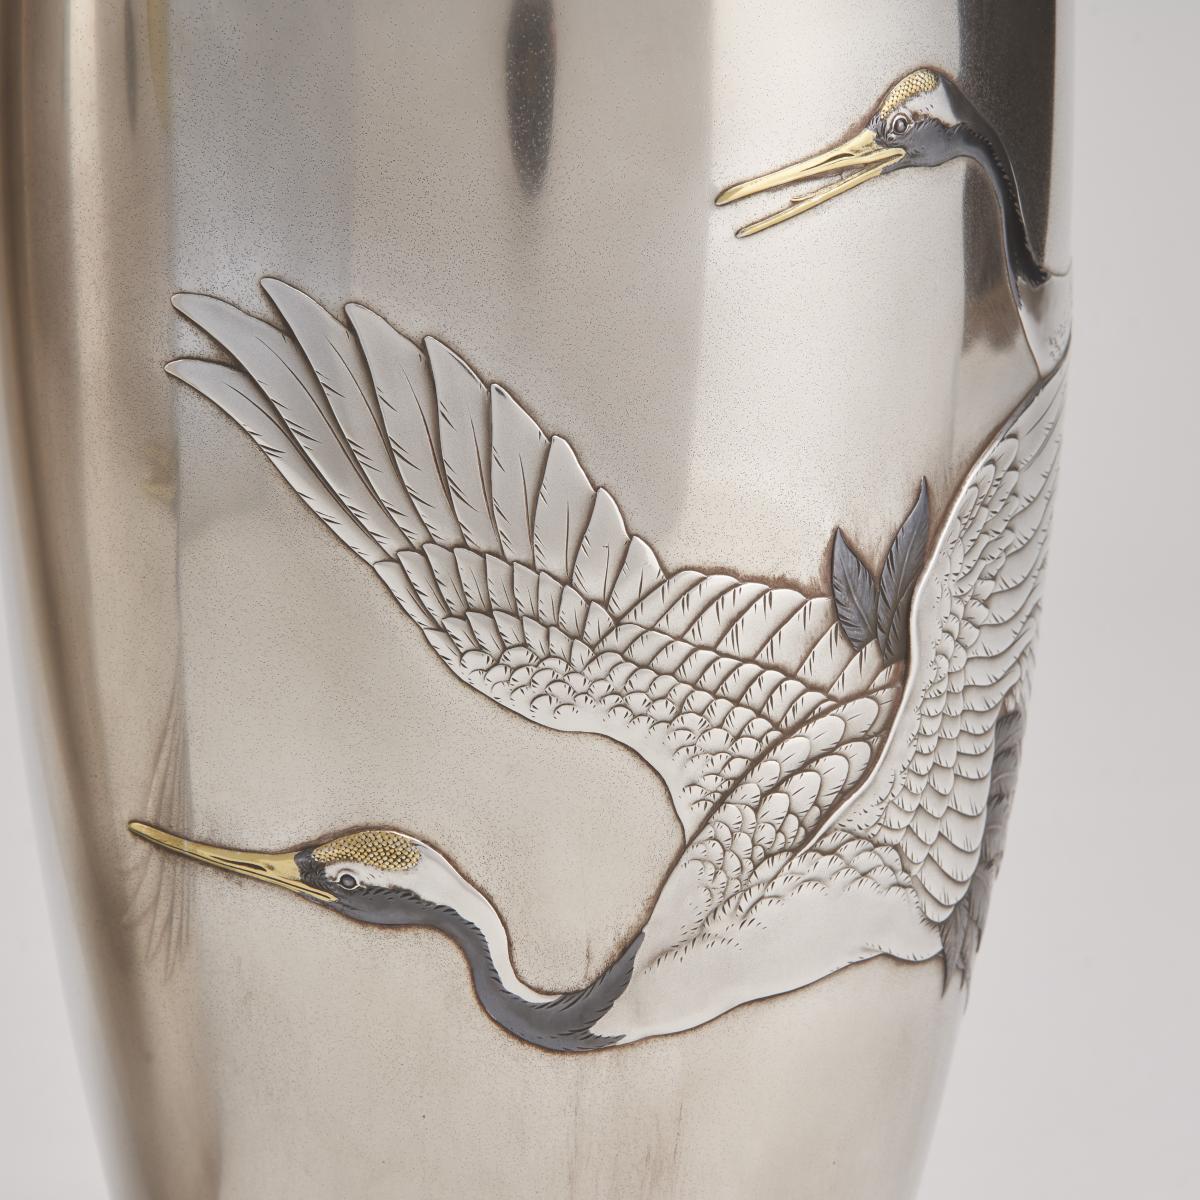 A stylish pair of Japanese silver vases depicting flying cranes (Circa 1915)